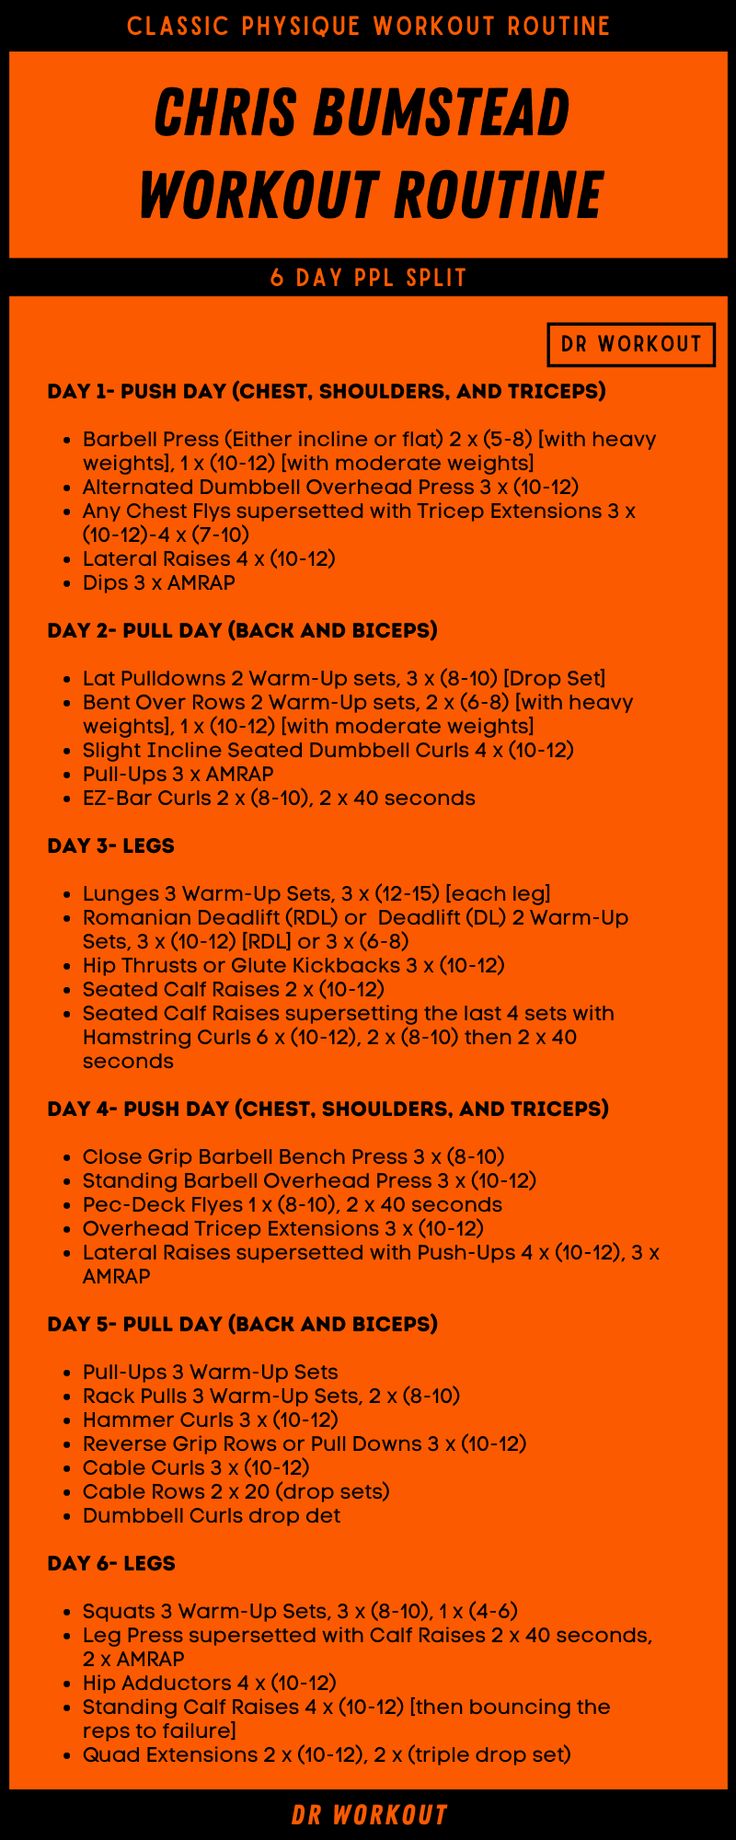 Chris Bumstead Workout Routine 6 Day Split Workout Men, Six Day Split Workout, Shred Gym Workout Plan, 6 Day Push Pull Workout Routine, Workout Routine To Gain Muscle, Lean And Fit Exercises, 6 Week Shred Workout Plans, Mens Weekly Workout Plans, Push Pull Legs 6 Day Split